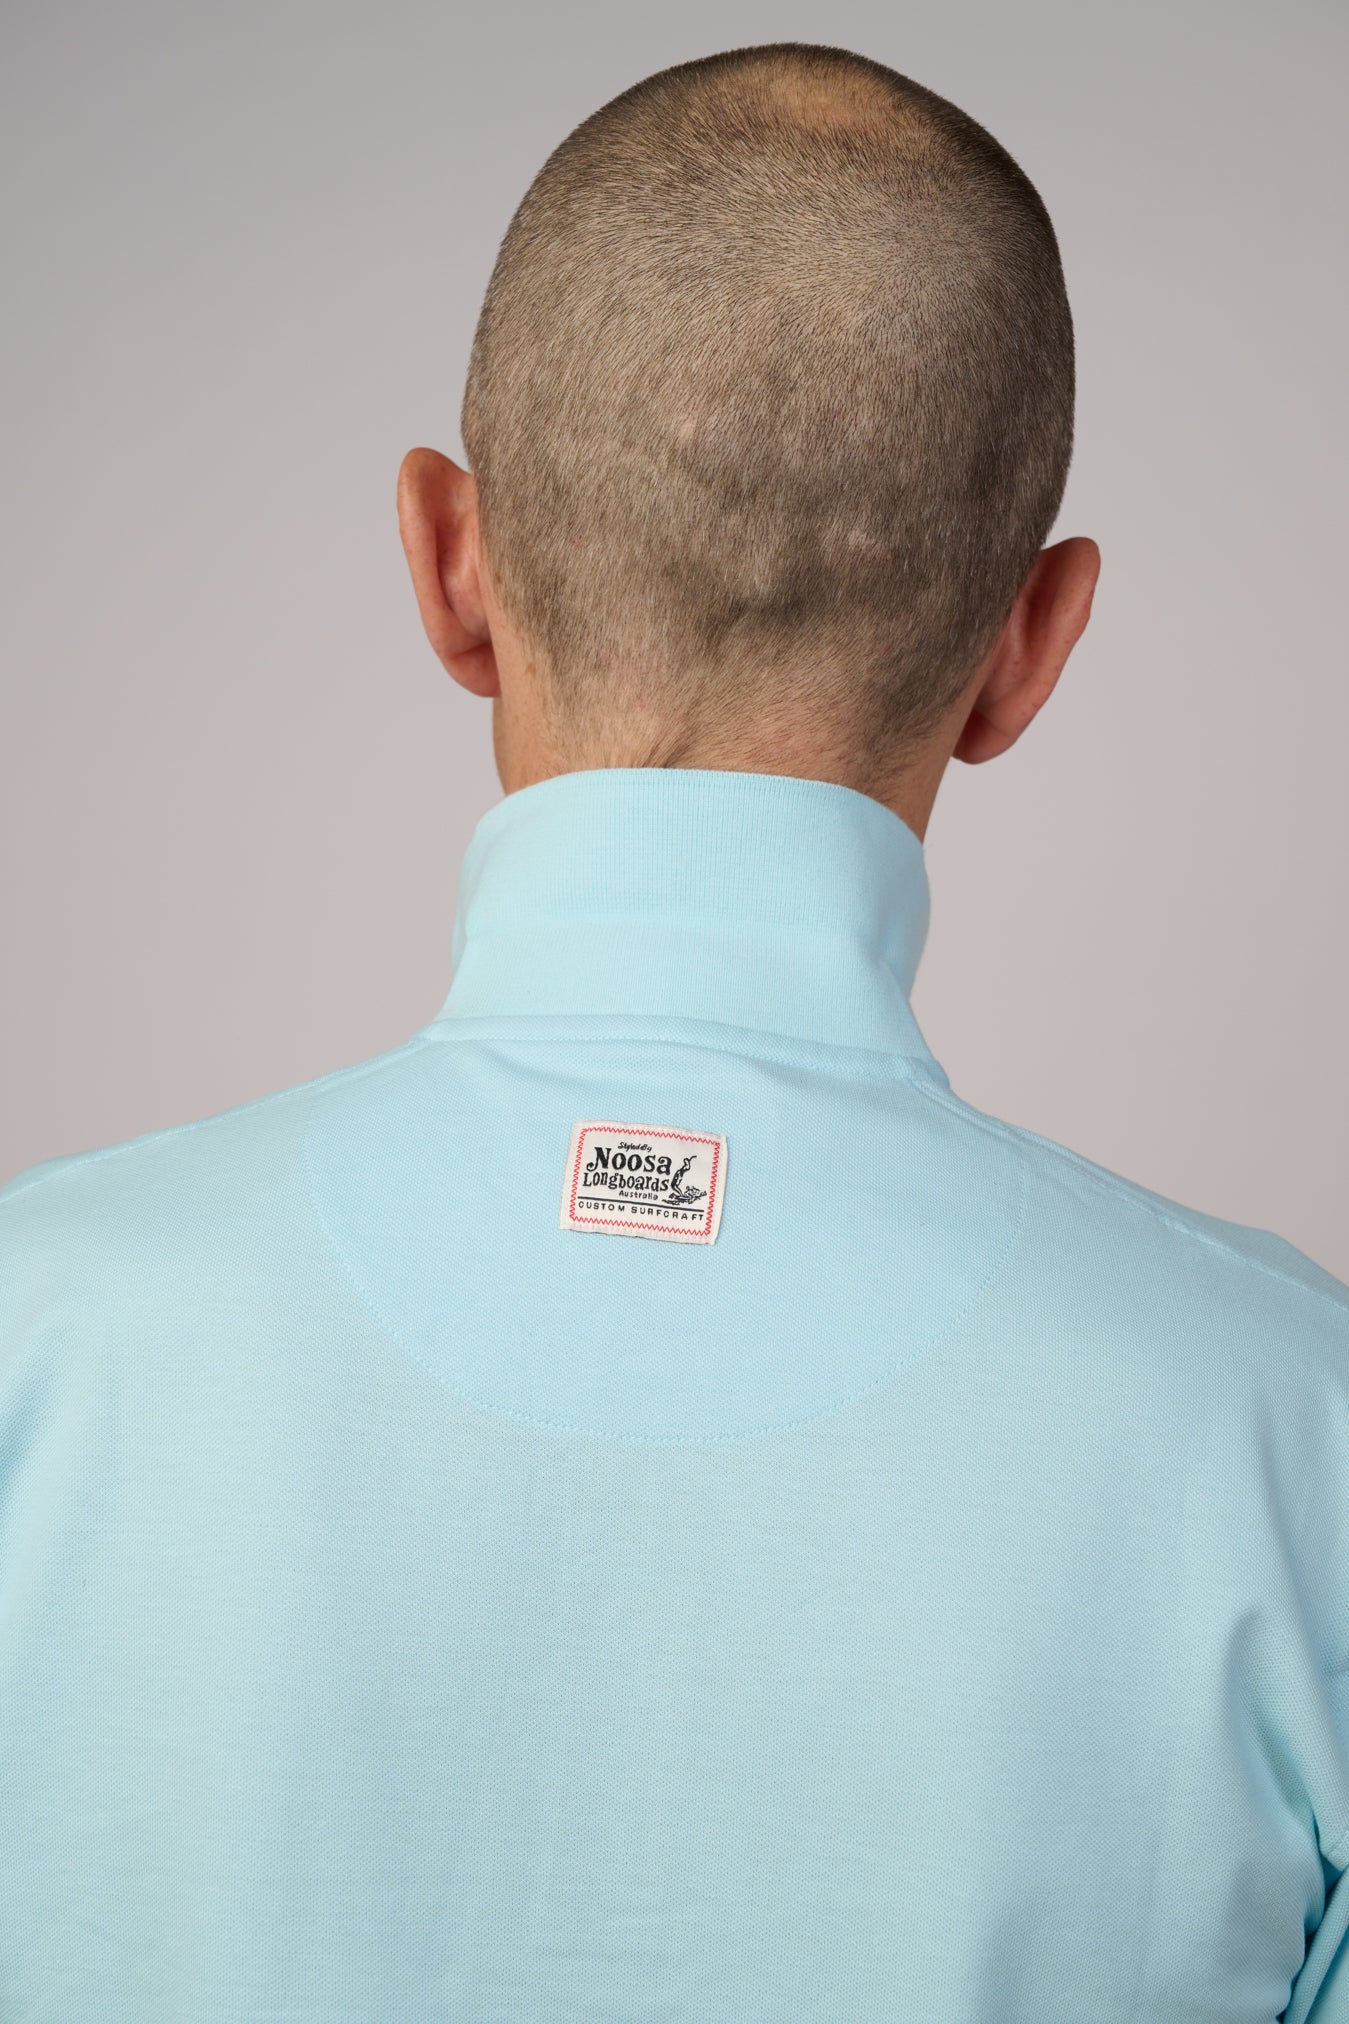 NL Embroidered Polo Light Blue